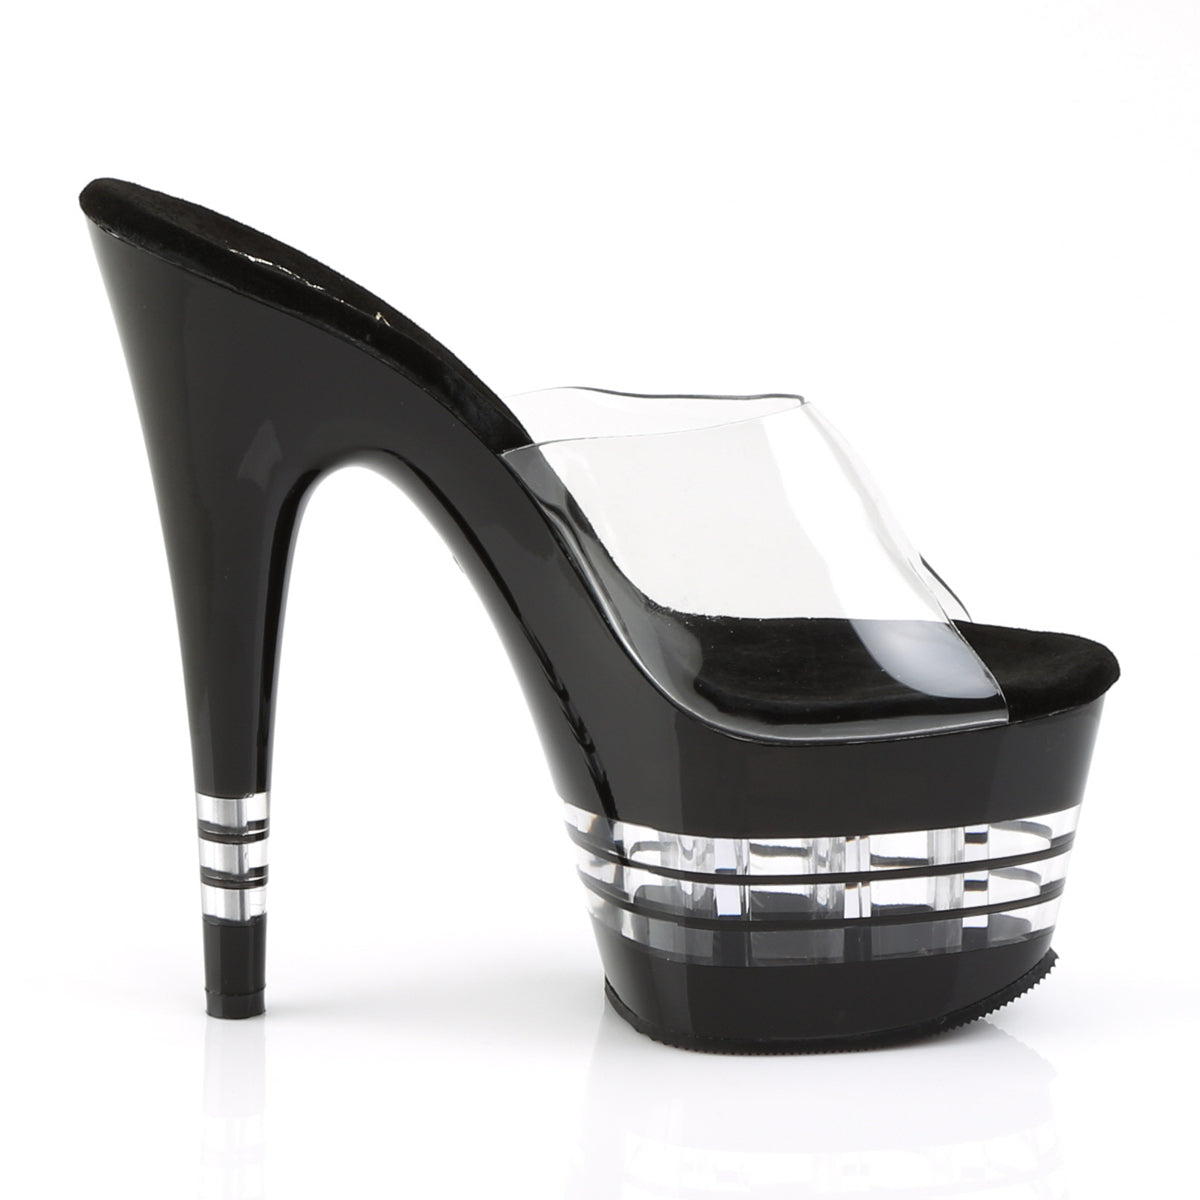 ADORE-701LN 7 Inch Heel Clear and Black Platforms Sexy Shoes-Pleaser- Sexy Shoes Fetish Heels